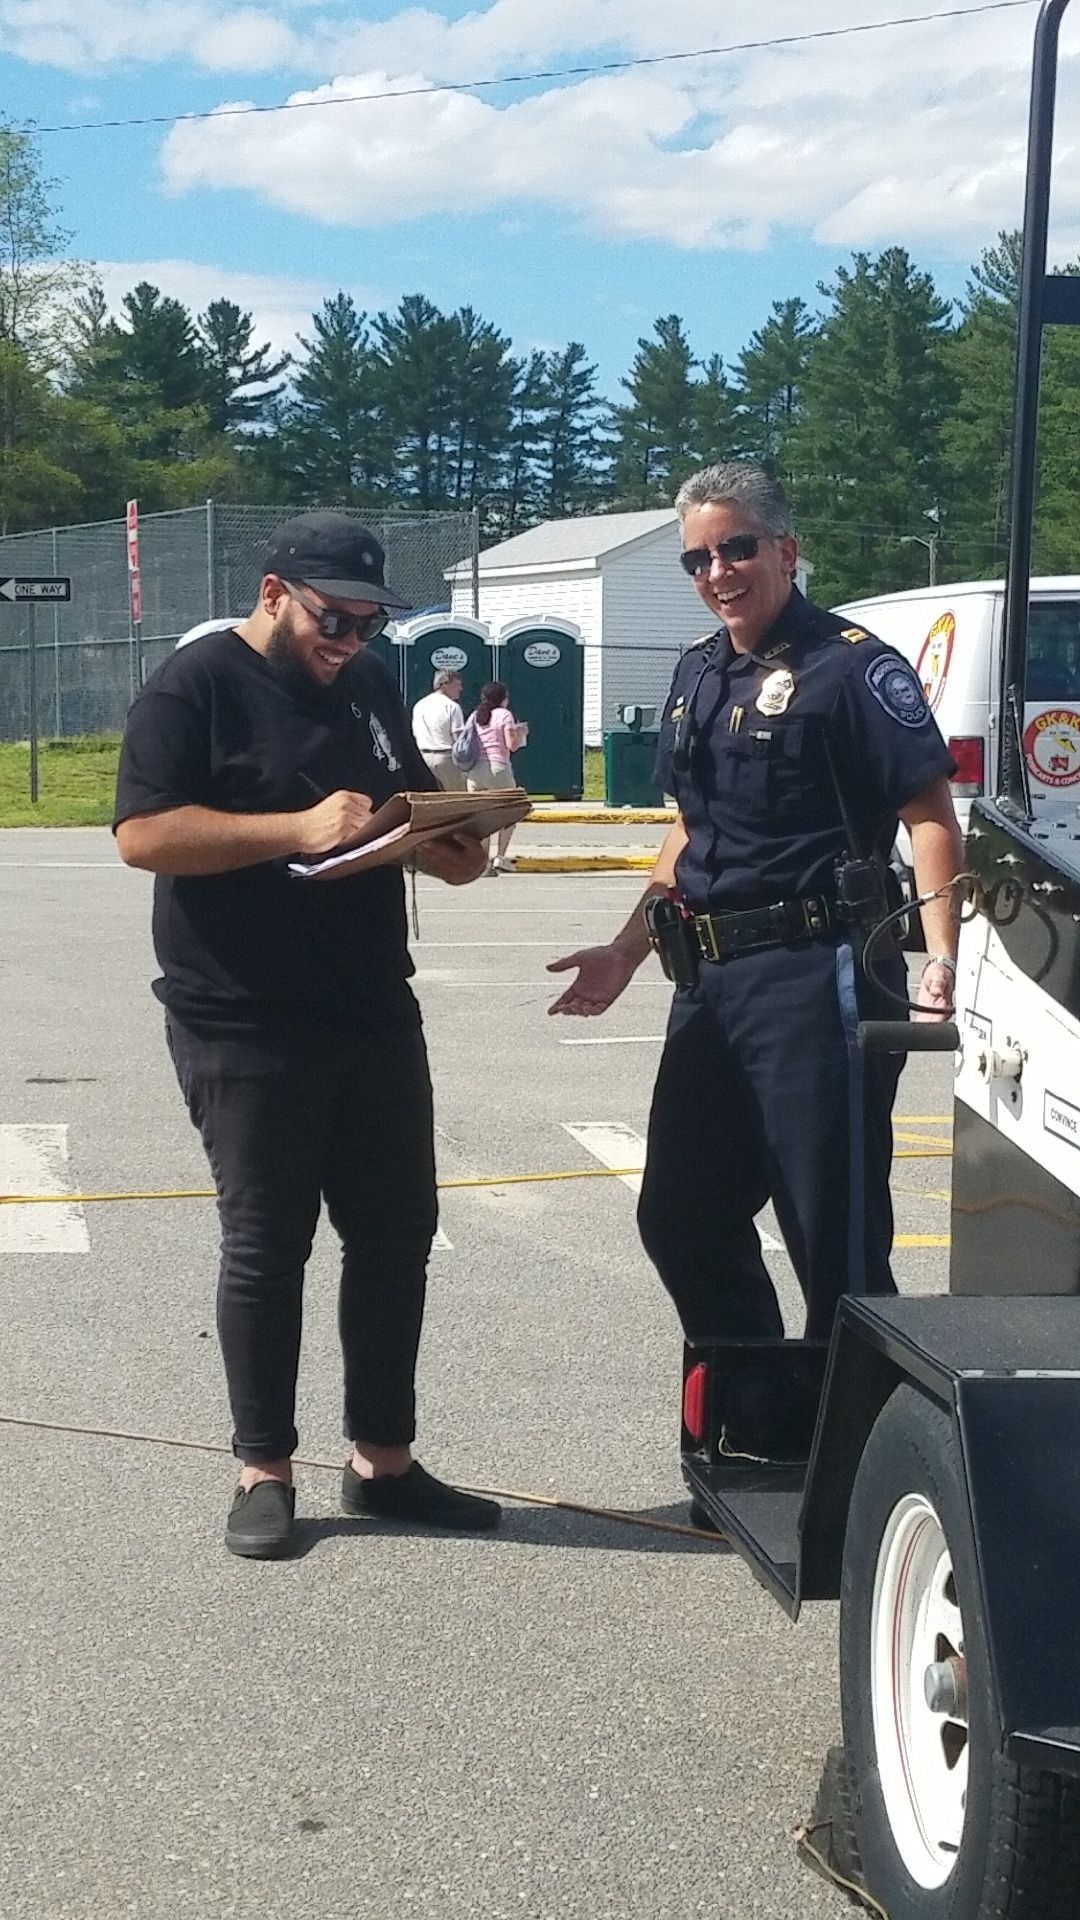 My buddy was signing a waver and asked the cop what the date was at a 4th of July Festival